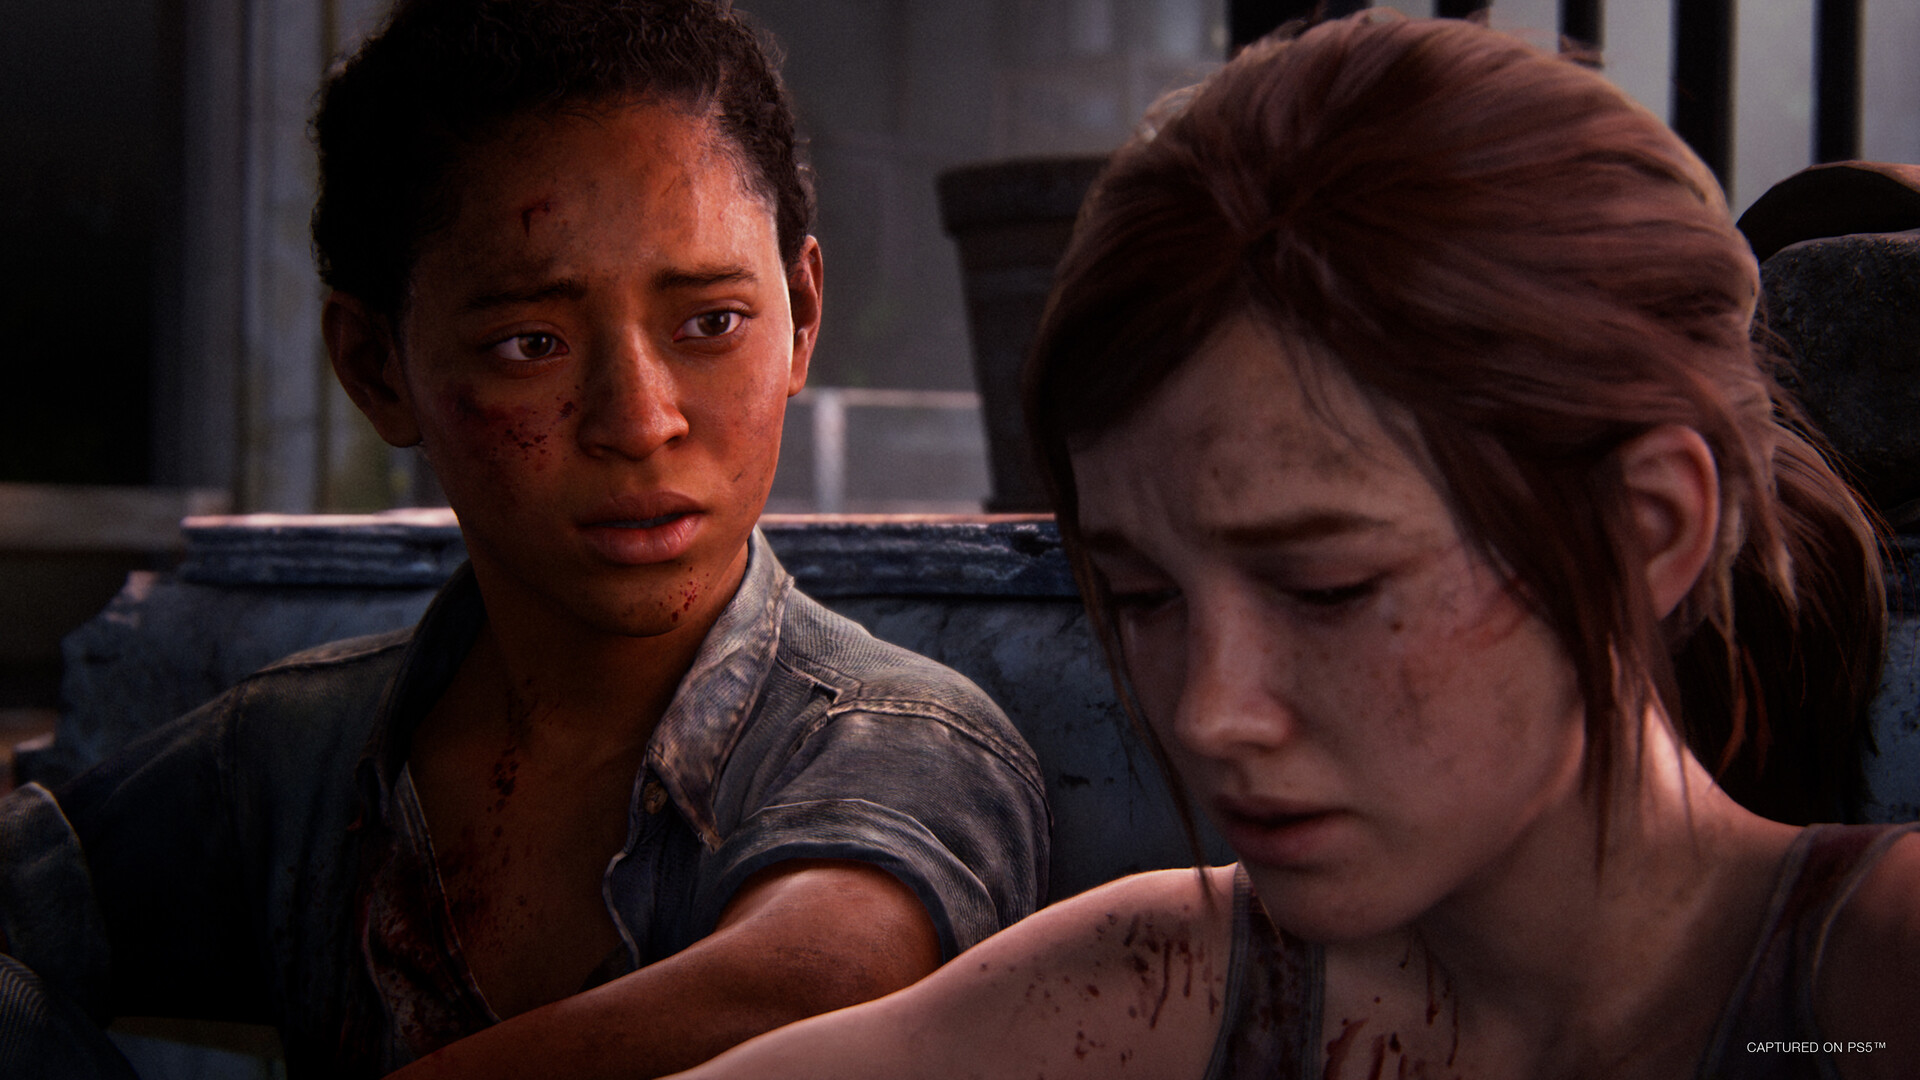 Will The Last of Us 2 Be on PC?